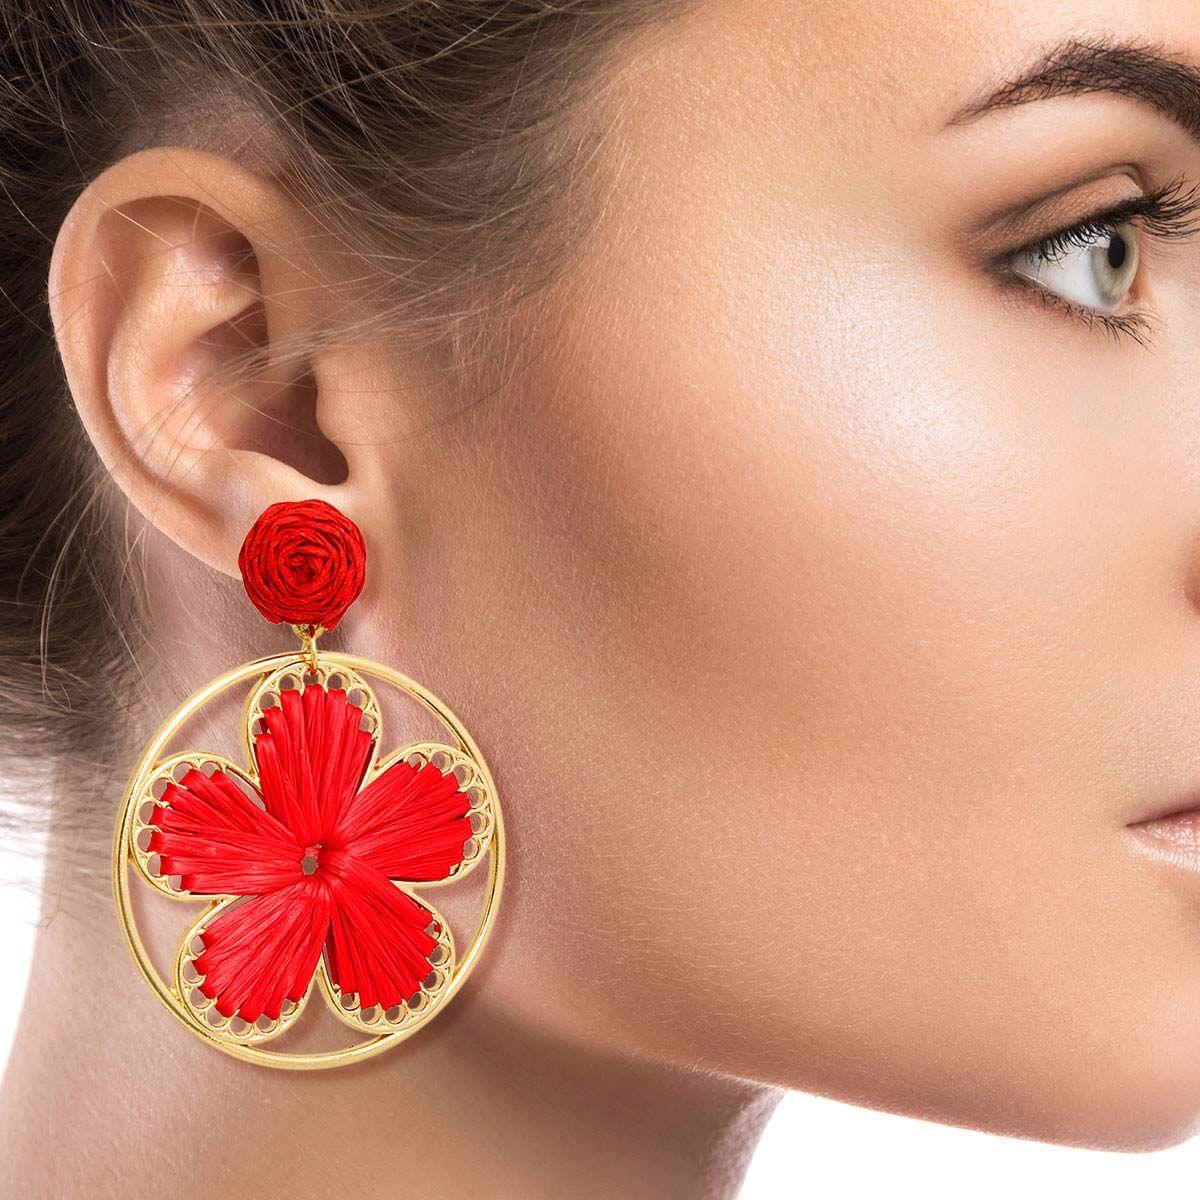 Red Raffia Flower Earrings: Shop Now for Unique Jewelry